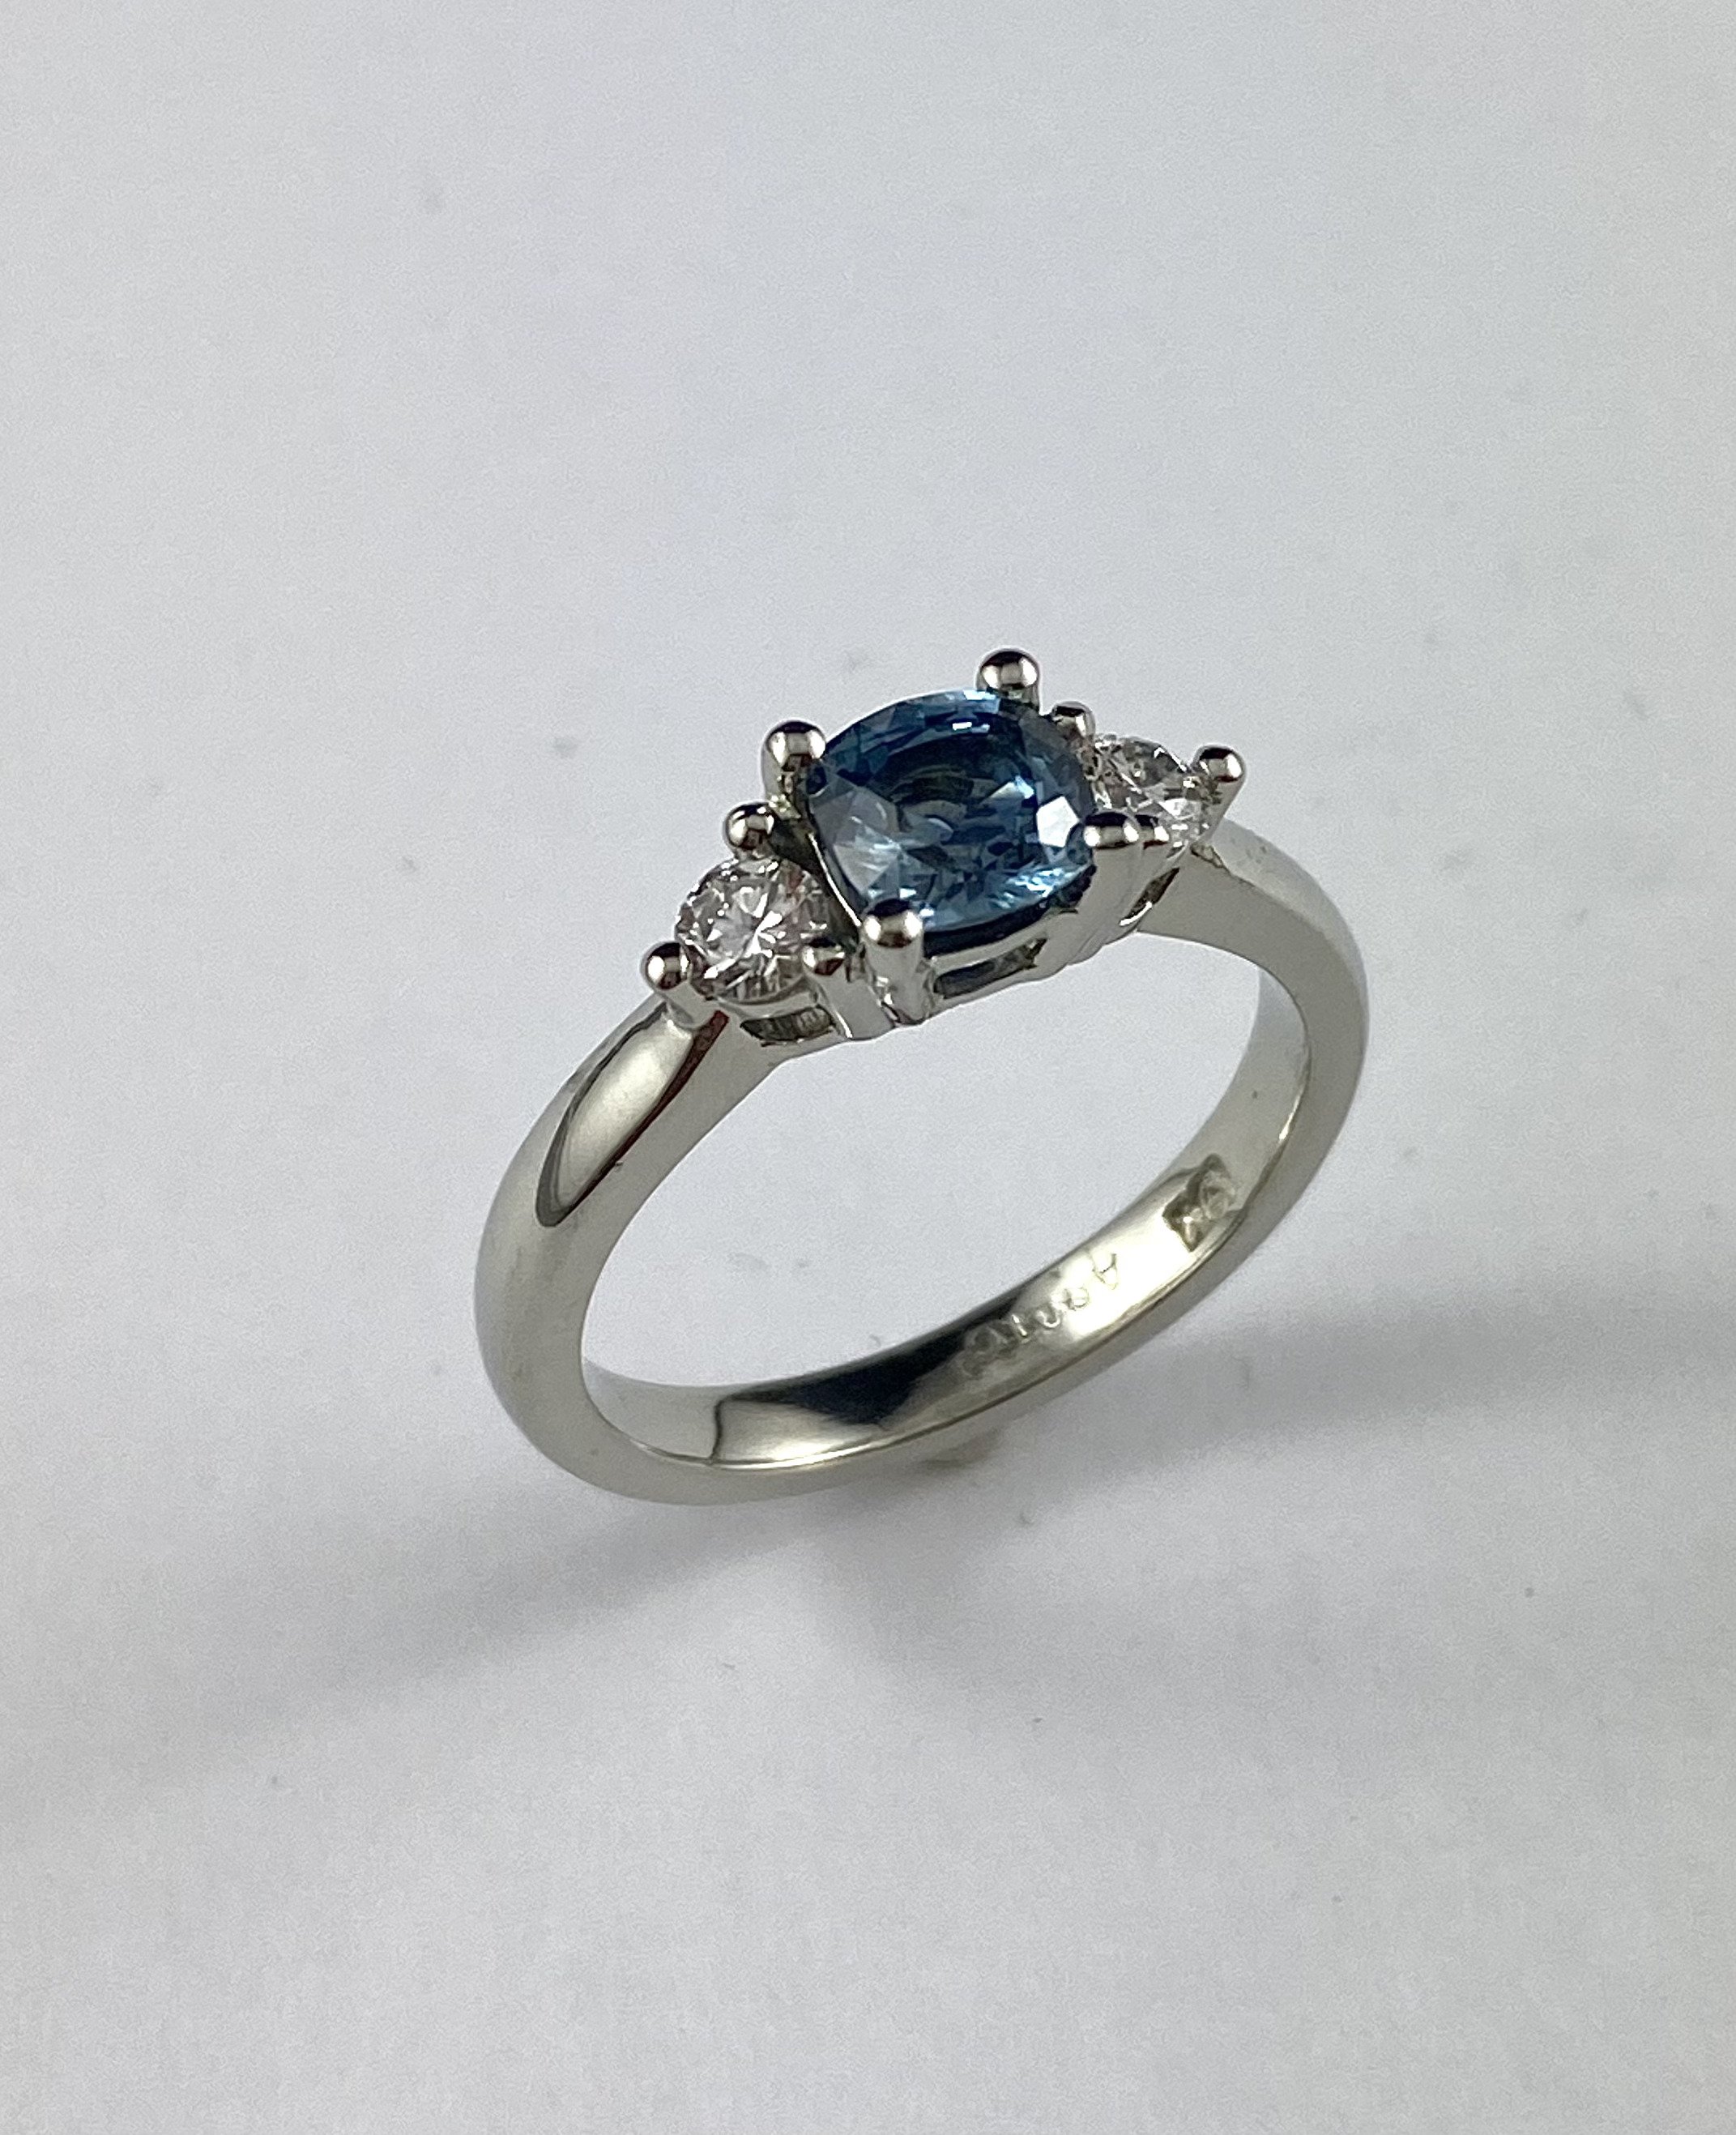 19K White Gold Montana Teal Coloured Sapphire Ring with Diamonds